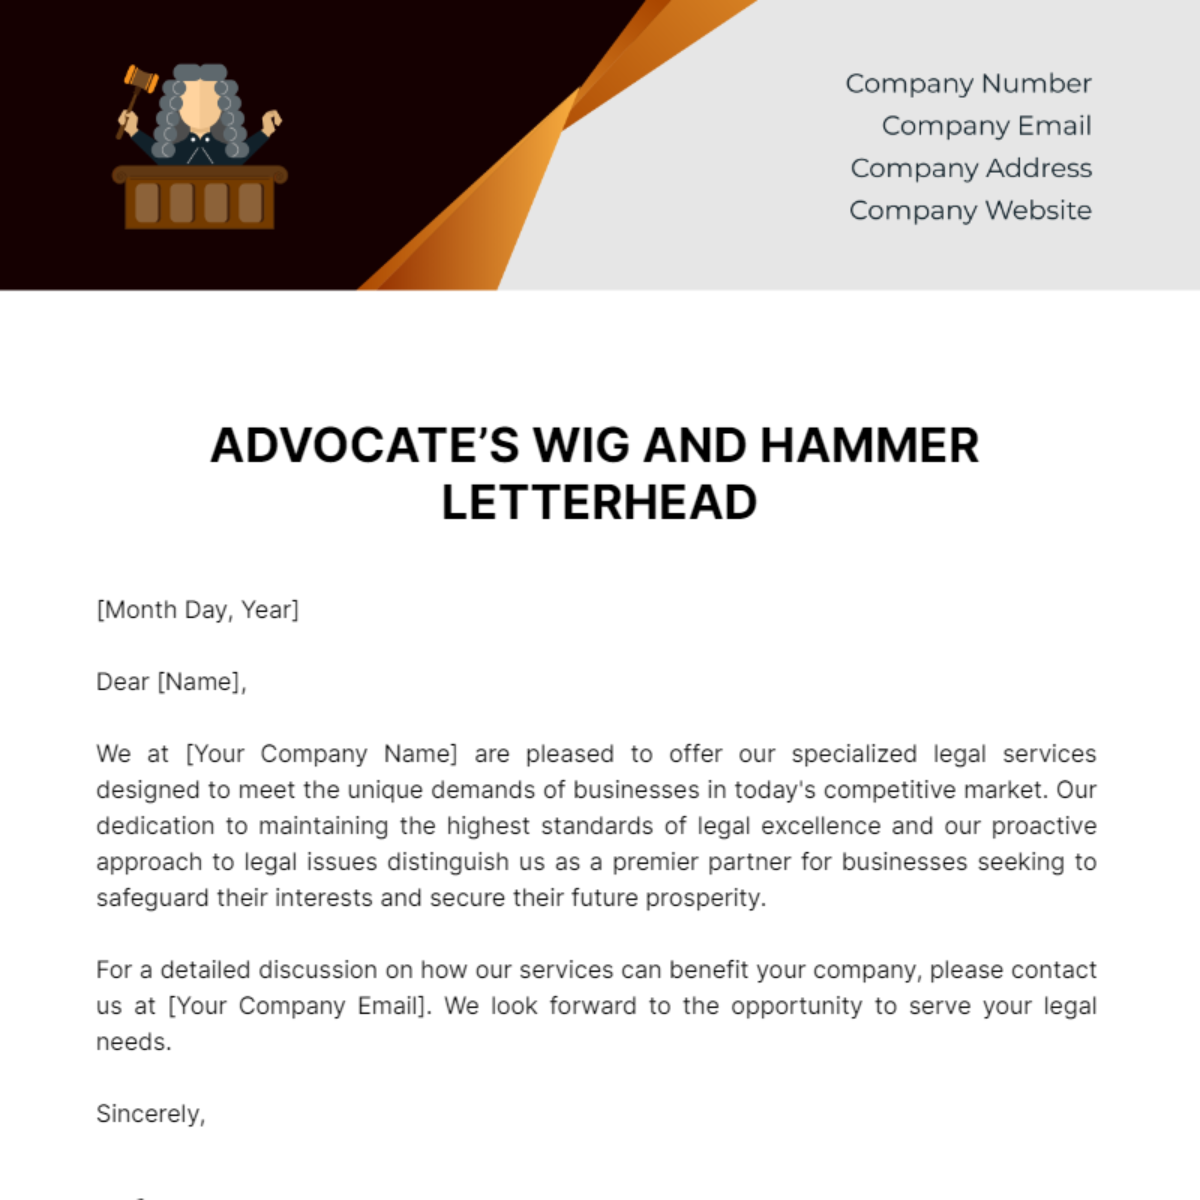 Free Advocate's Wig and Hammer Letterhead Template